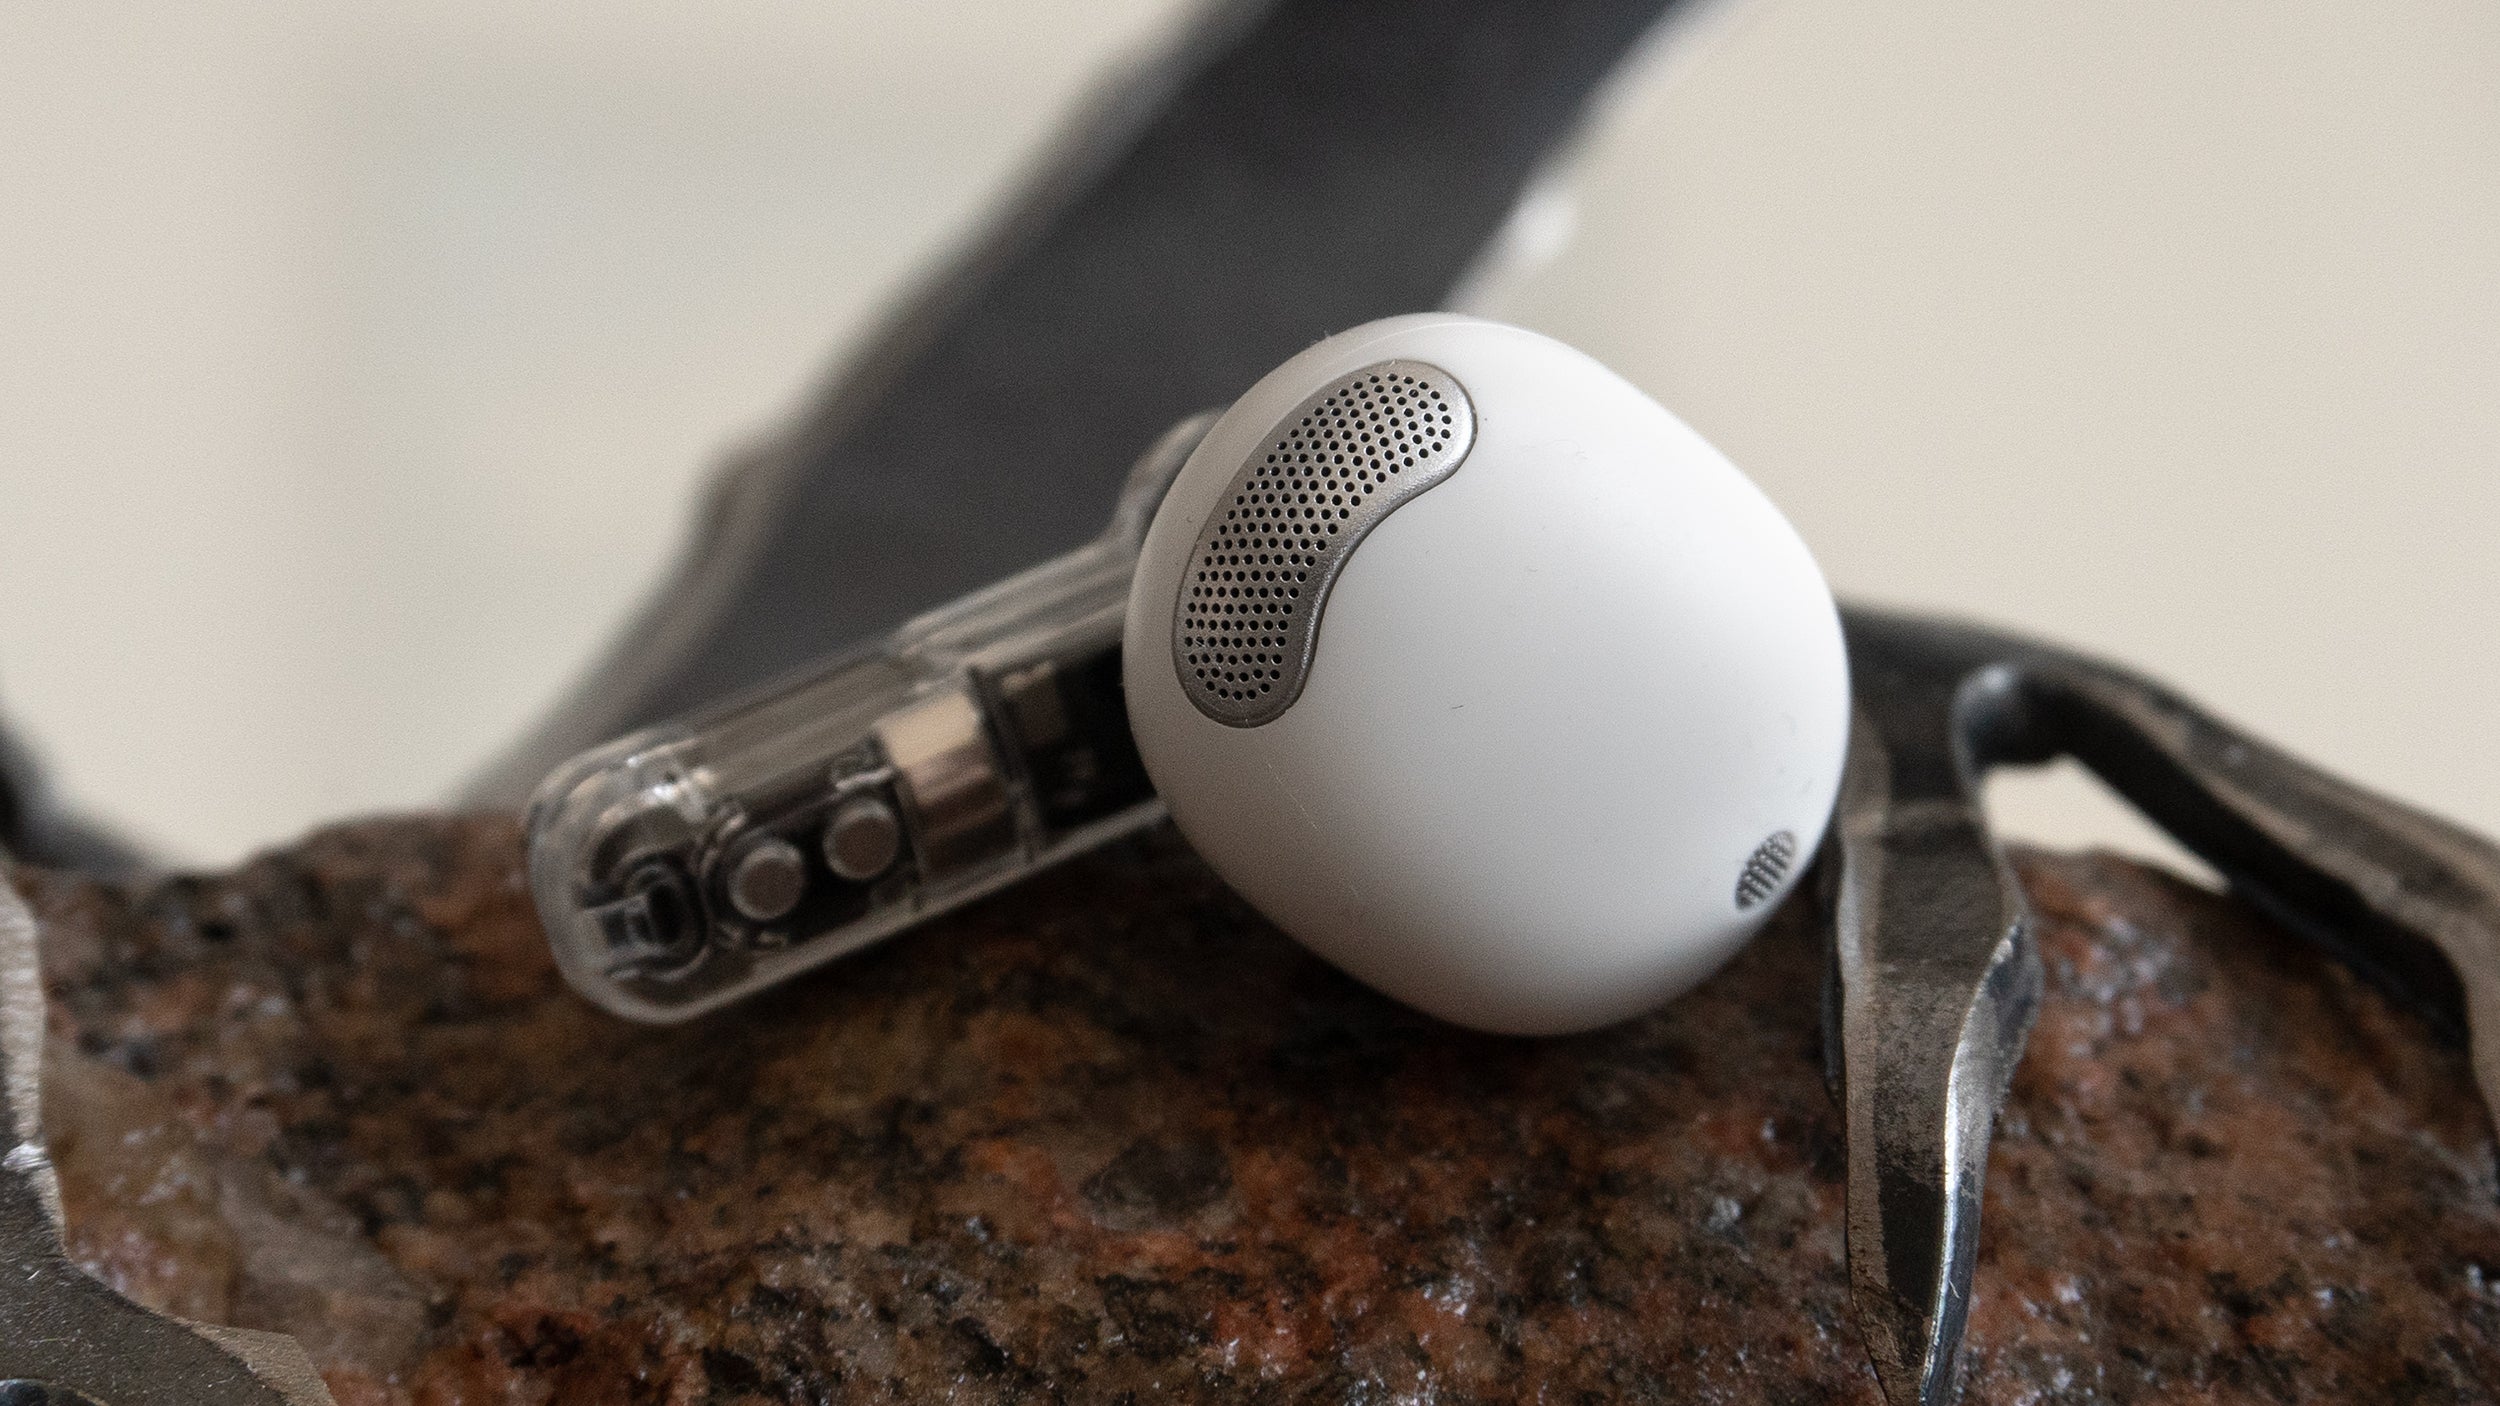 The bulbous speaker unit of the Ear (stick) fits very comfortably in the folds of the ear. (Photo: Andrew Liszewski | Gizmodo)